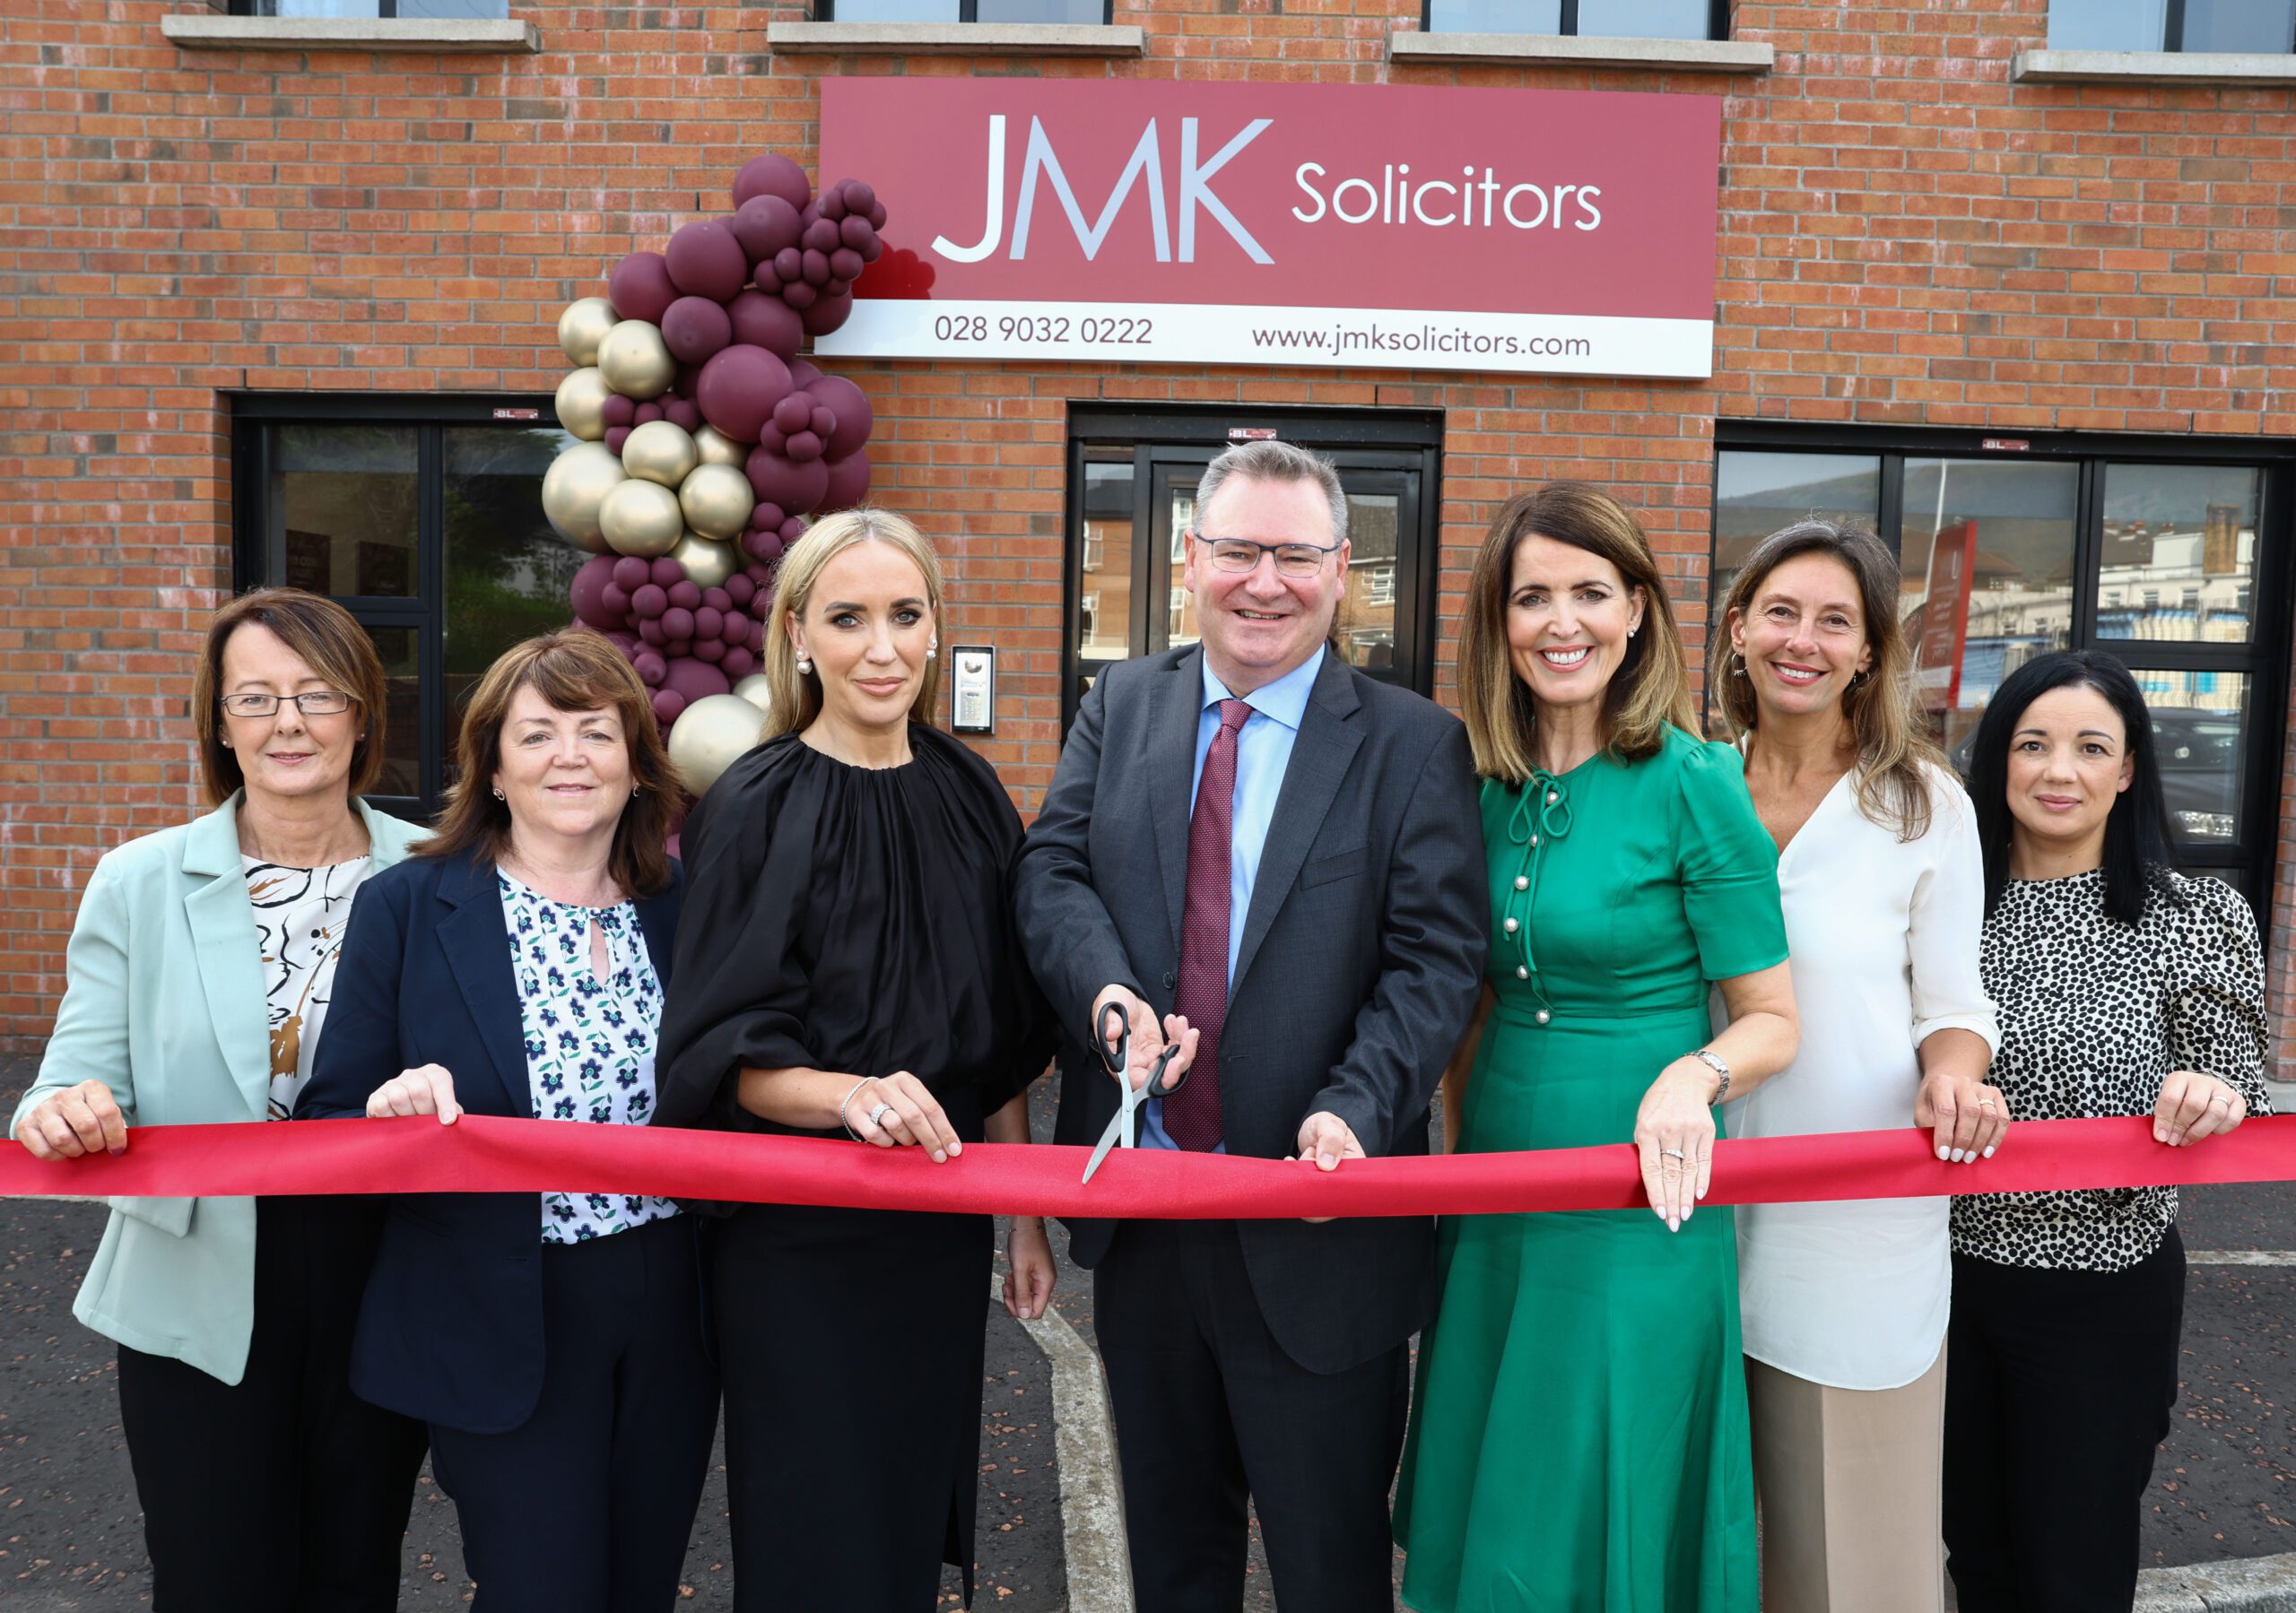 JMK Solicitors expand into West Belfast with the opening of Andersonstown Road office! Catherine Shortt, Kathleen Hughes, Legal Services Director Olivia Meehan, Chairman Jonathan McKeown, Managing Director Maurece Hutchinson, Vanessa Leeson, Deborah Floyd